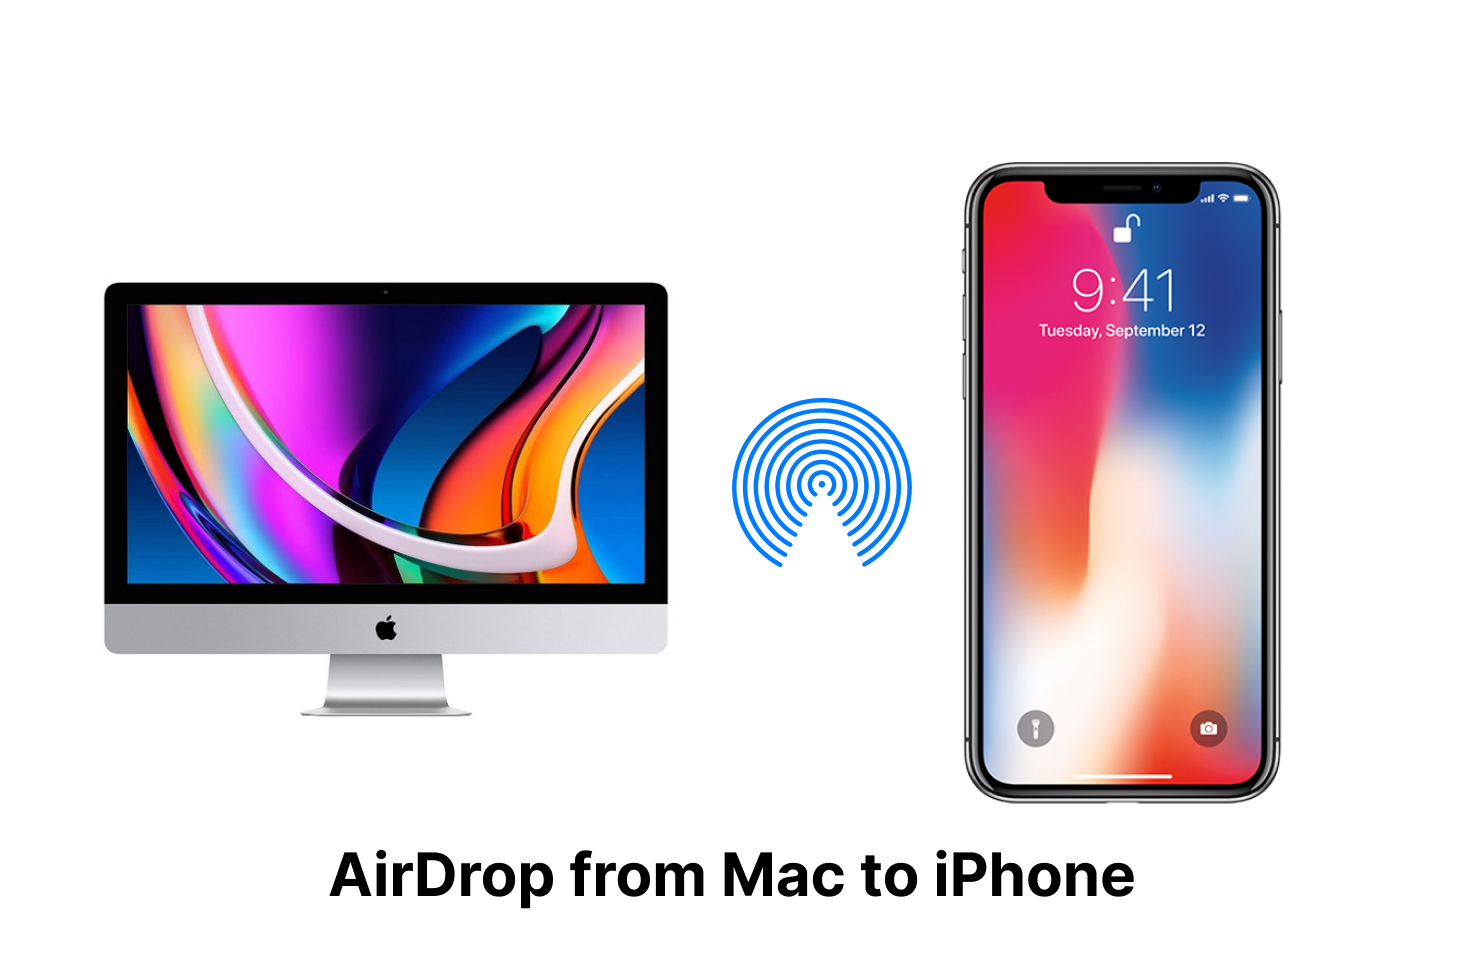 [Guide] How Can I AirDrop from Mac to iPhone?